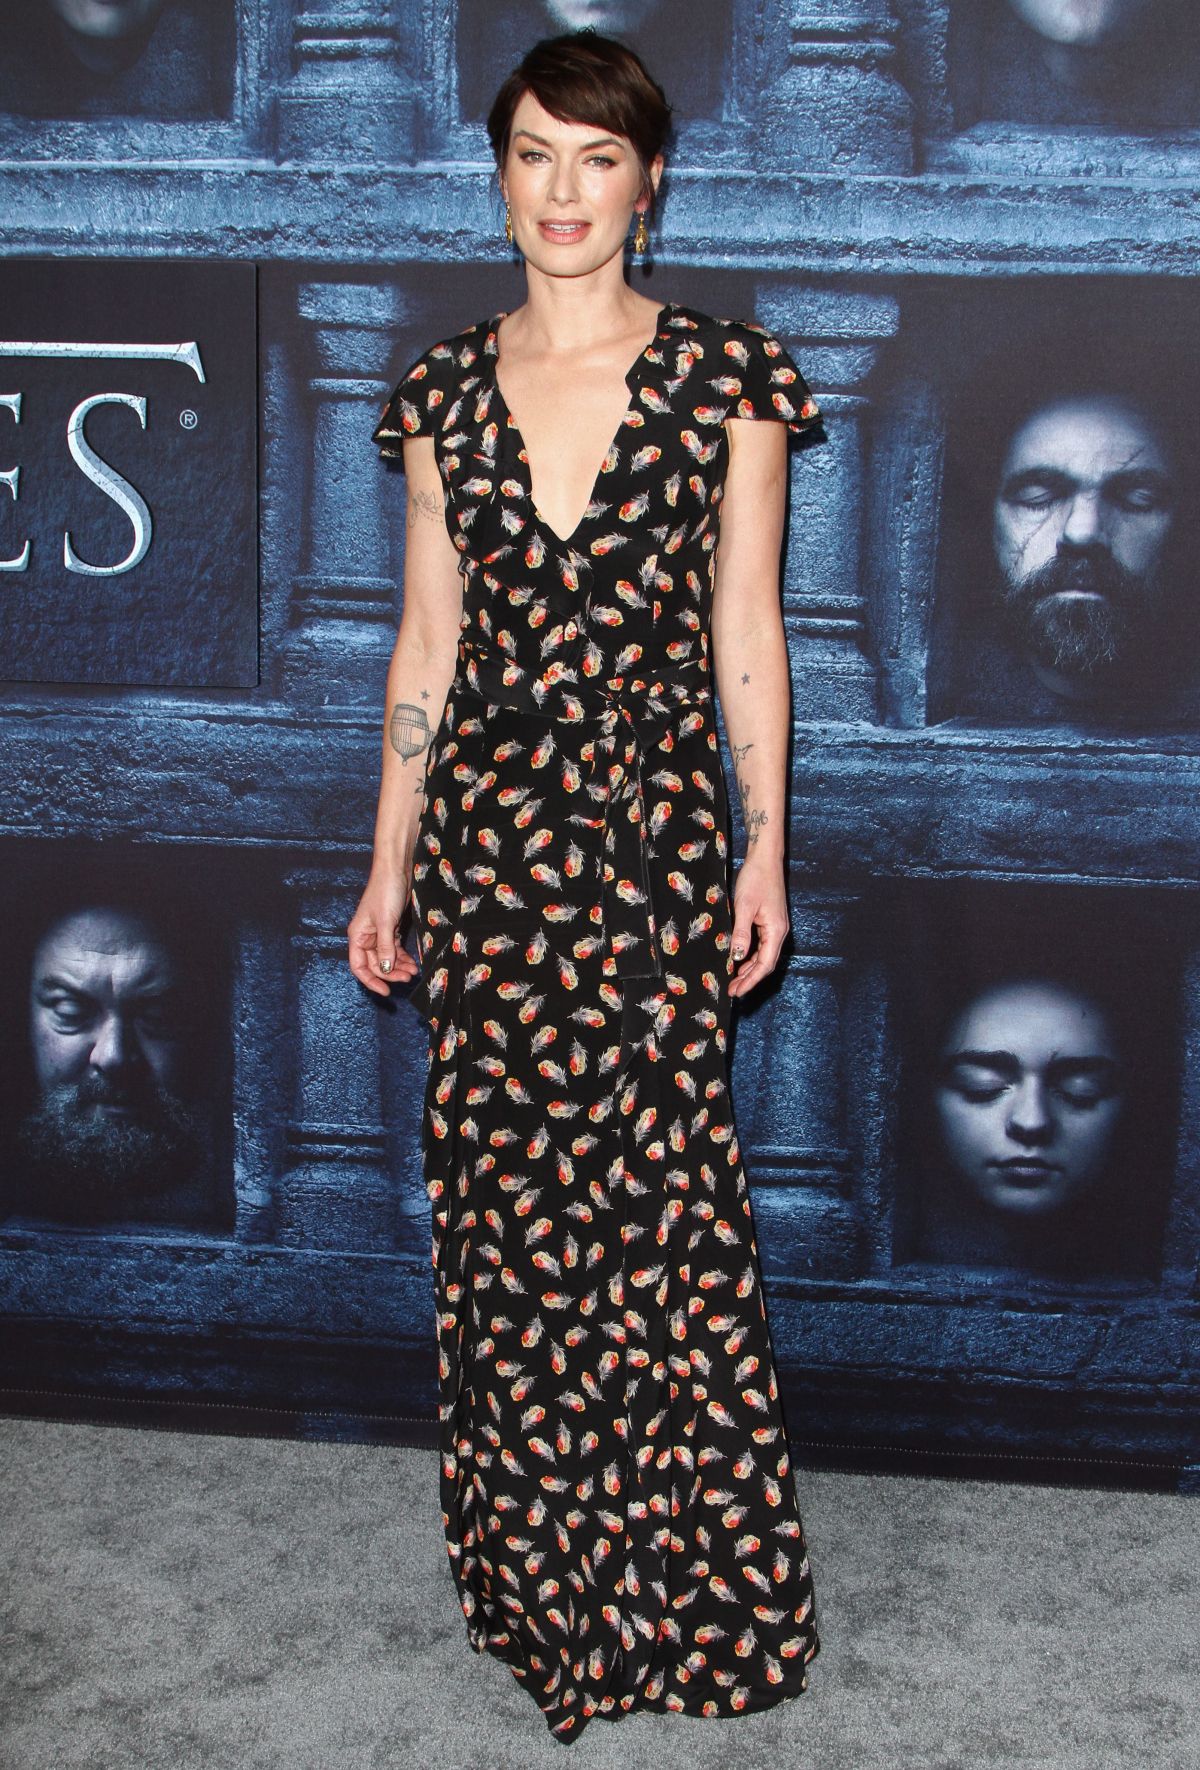 LENA HEADEY at ‘Game of Thrones: Season 6’ Premiere in Hollywood 04/10 ...